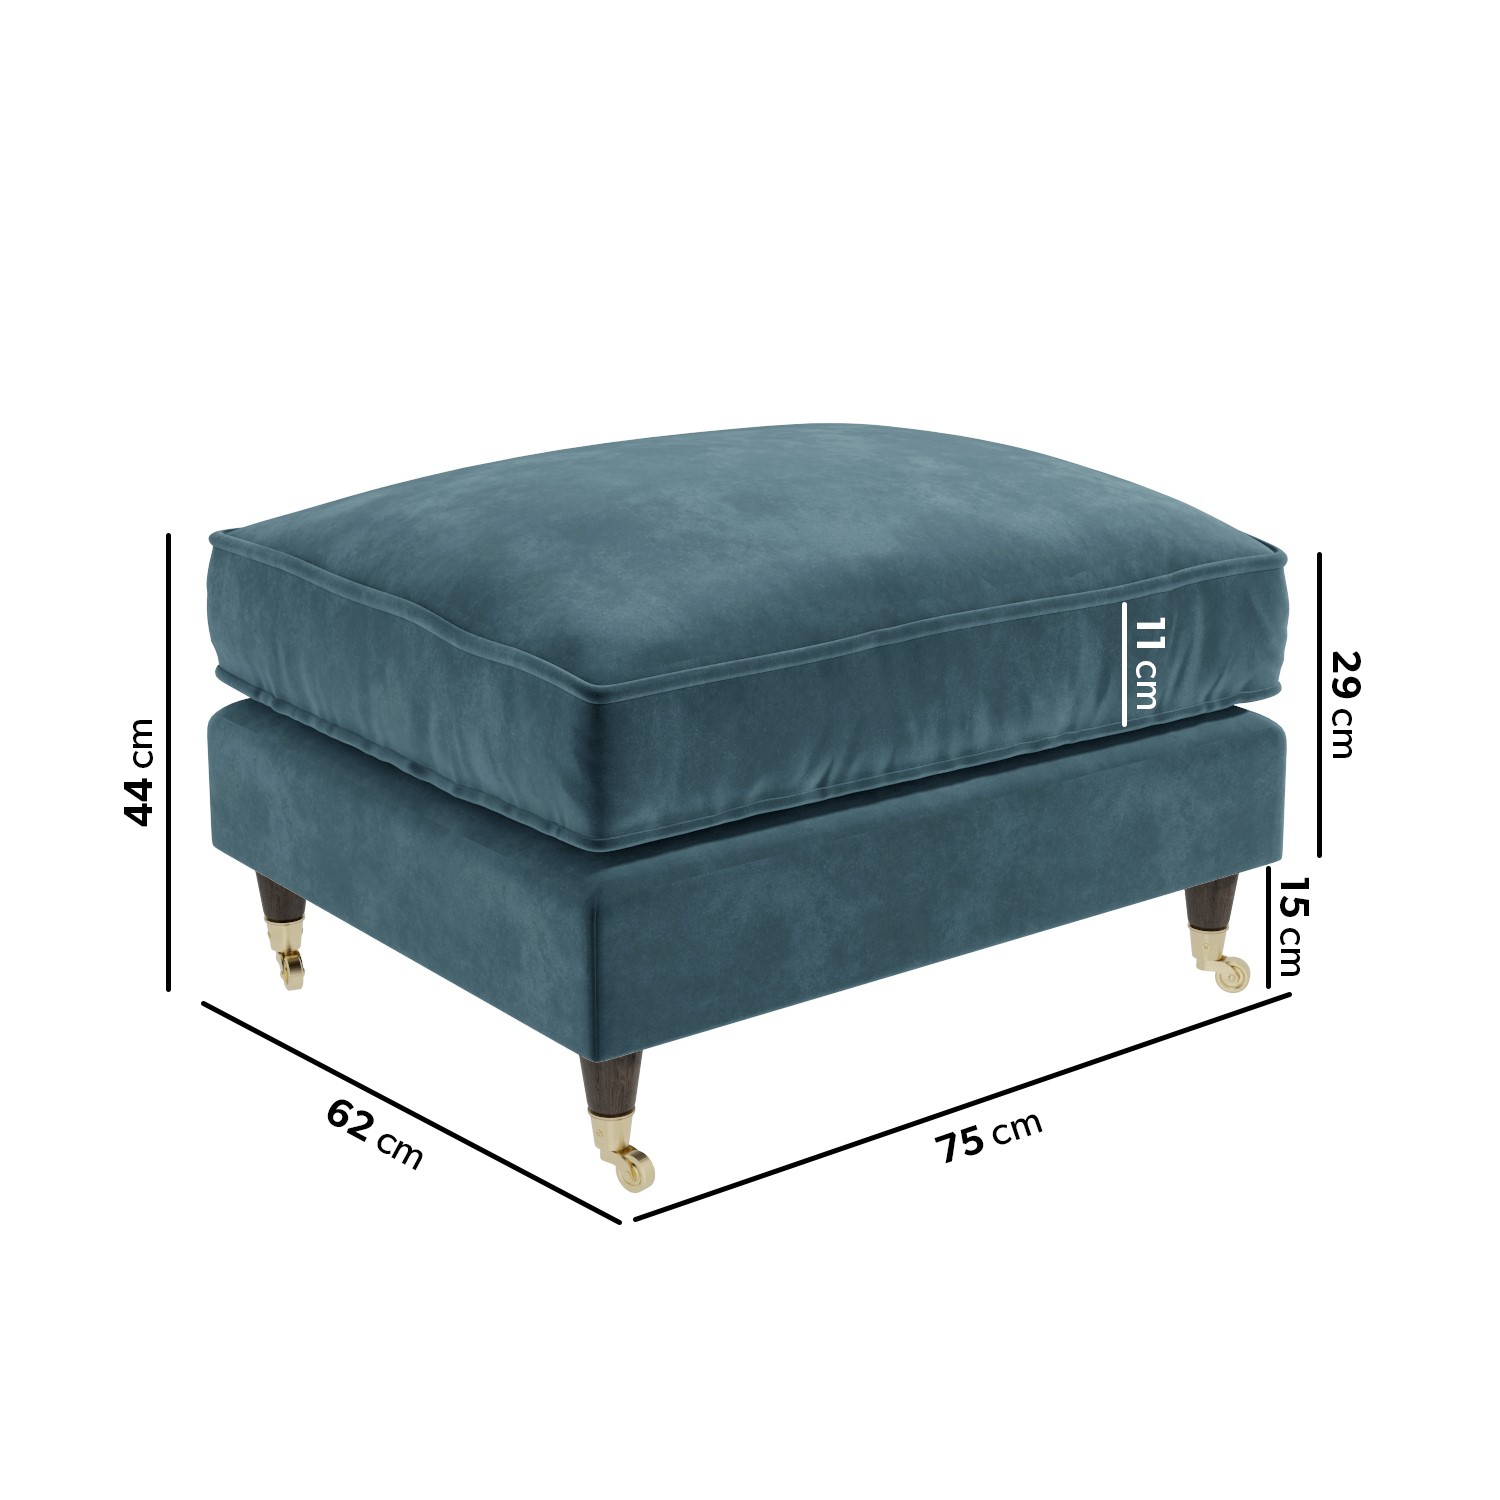 Read more about Blue velvet footstool payton